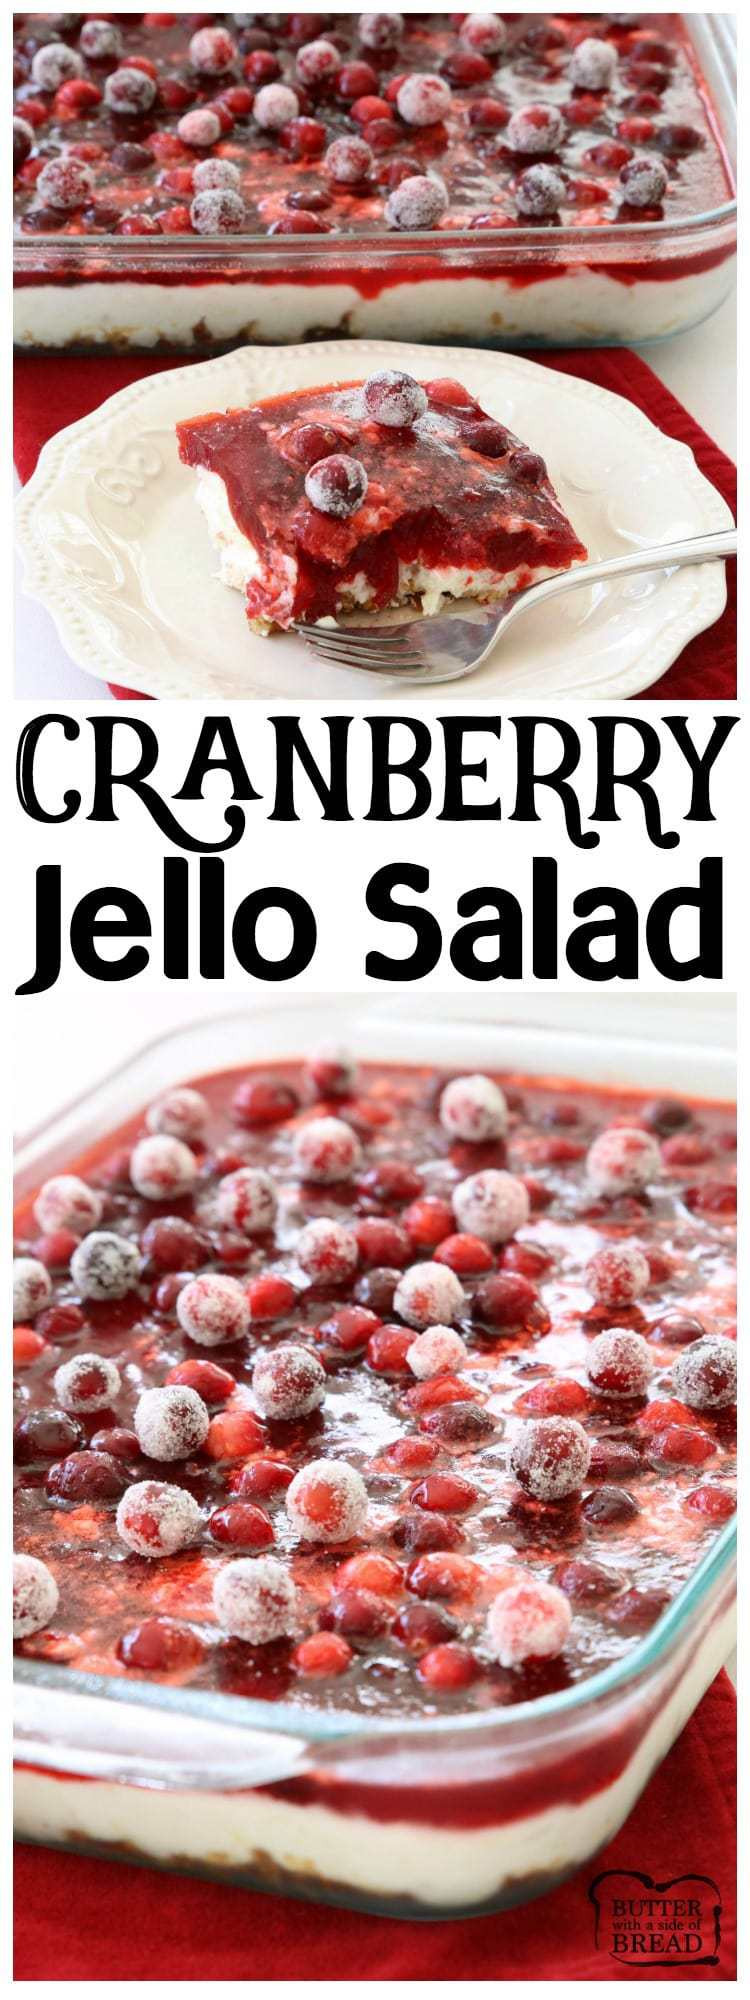 Cranberry Salad Recipes For Thanksgiving
 CRANBERRY JELLO SALAD Butter with a Side of Bread